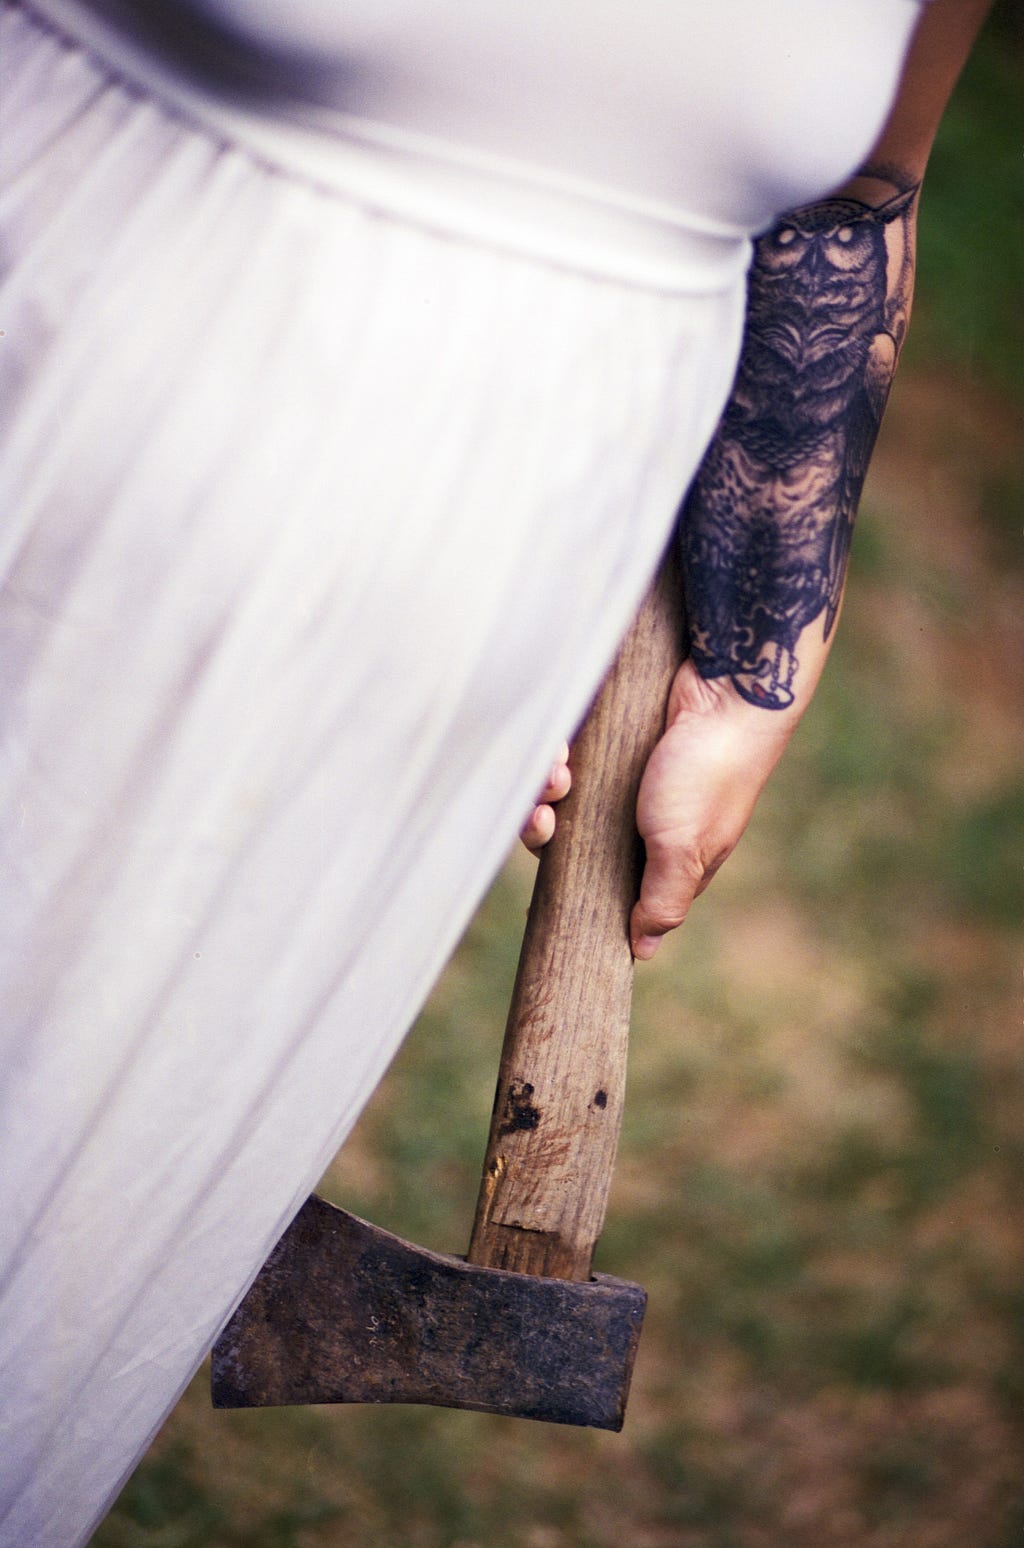 Woman wearing white shirt and holding an axe.